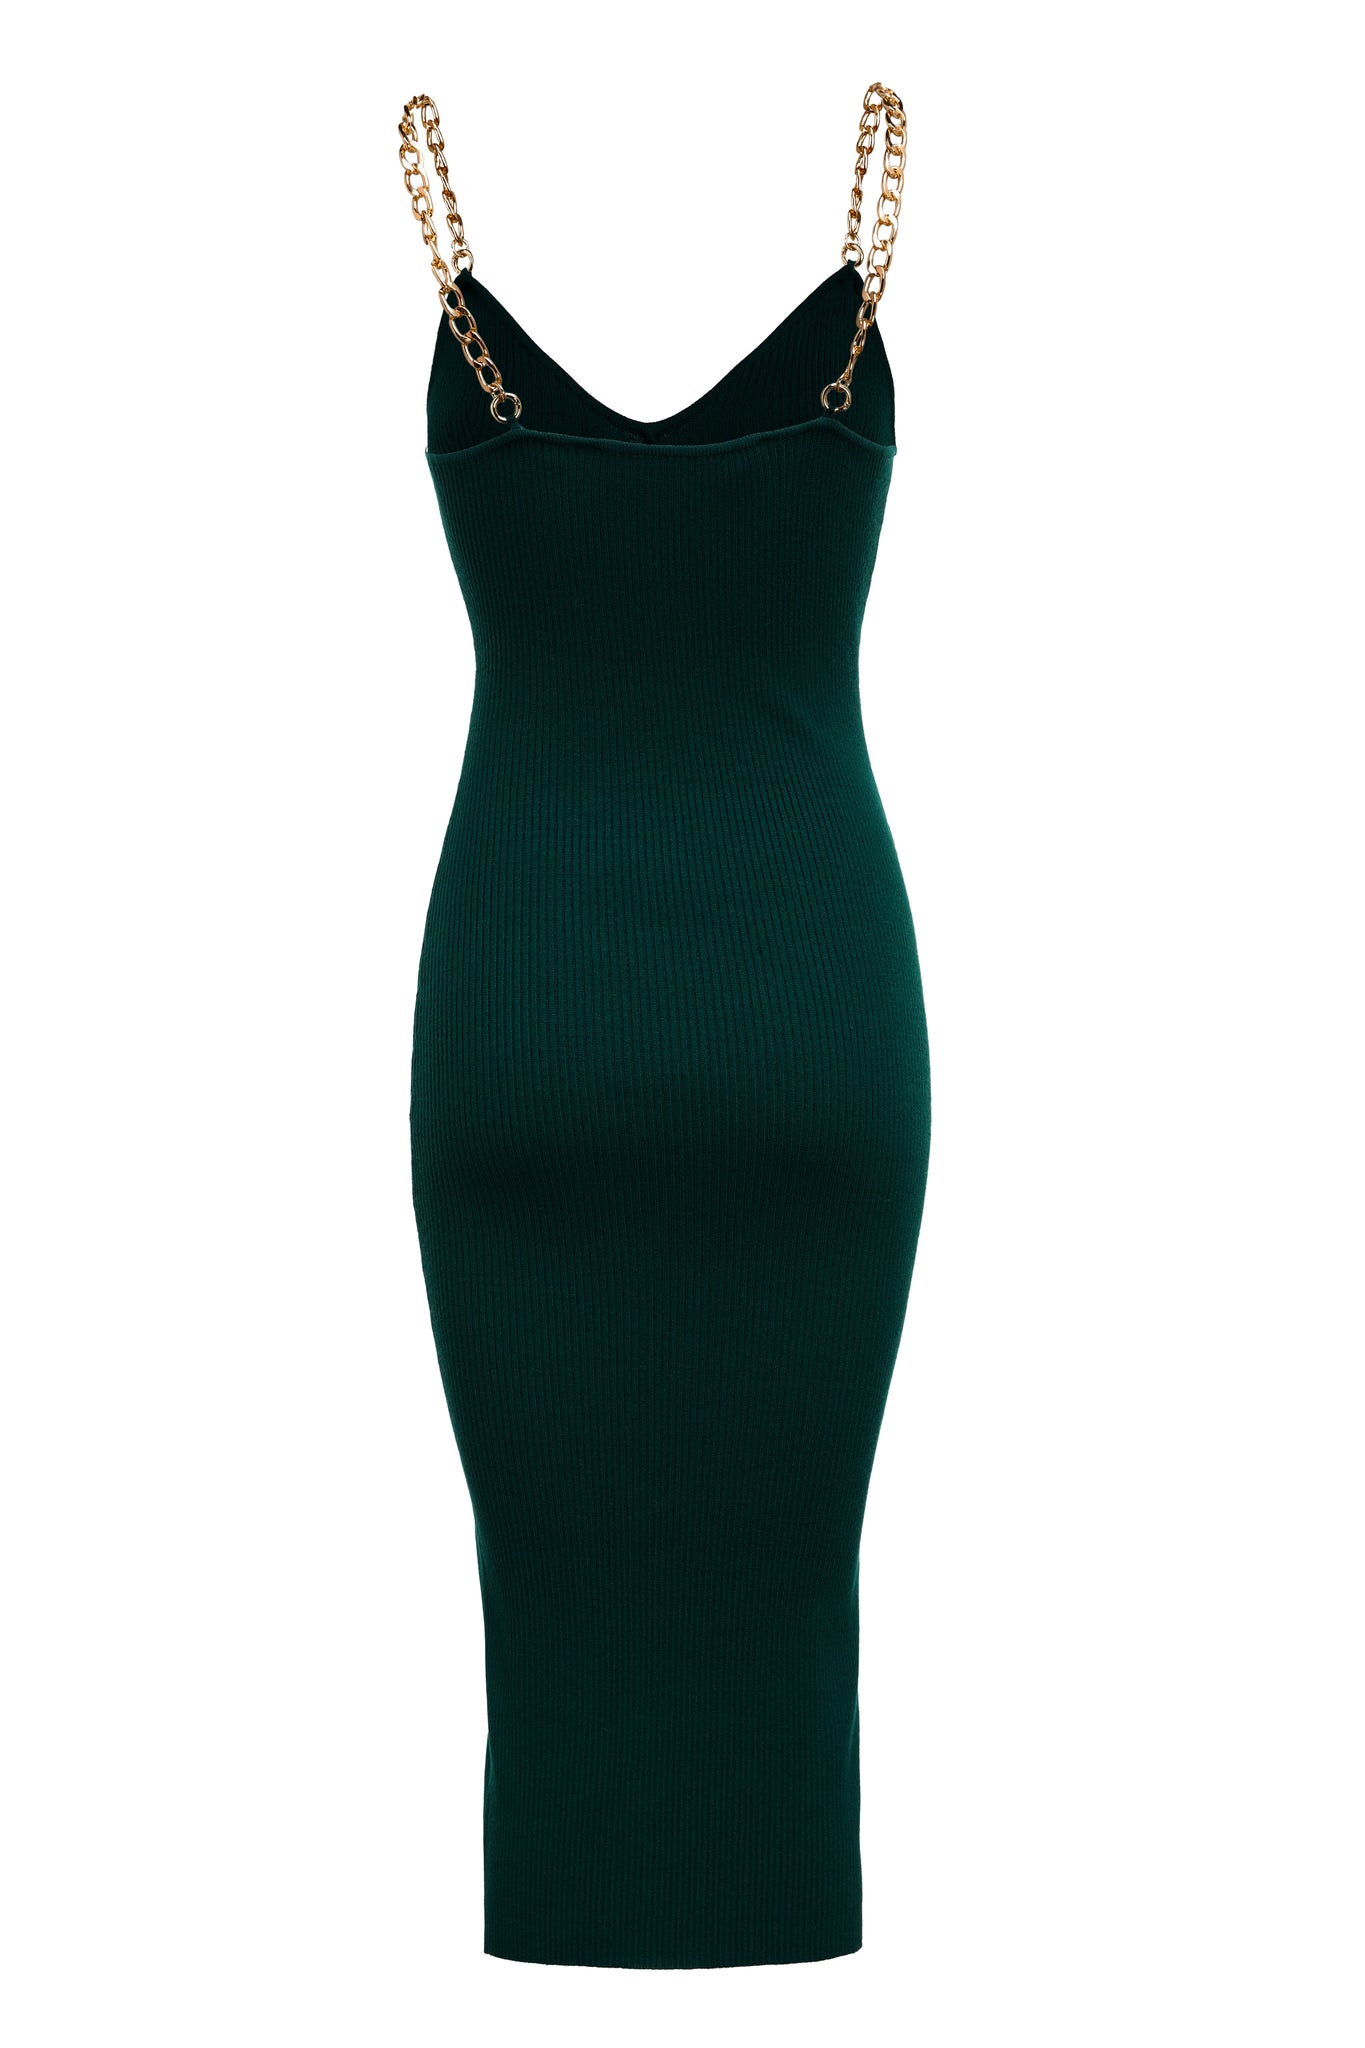 back shot of womens emerald ribbed v neck midi dress with gold chain straps